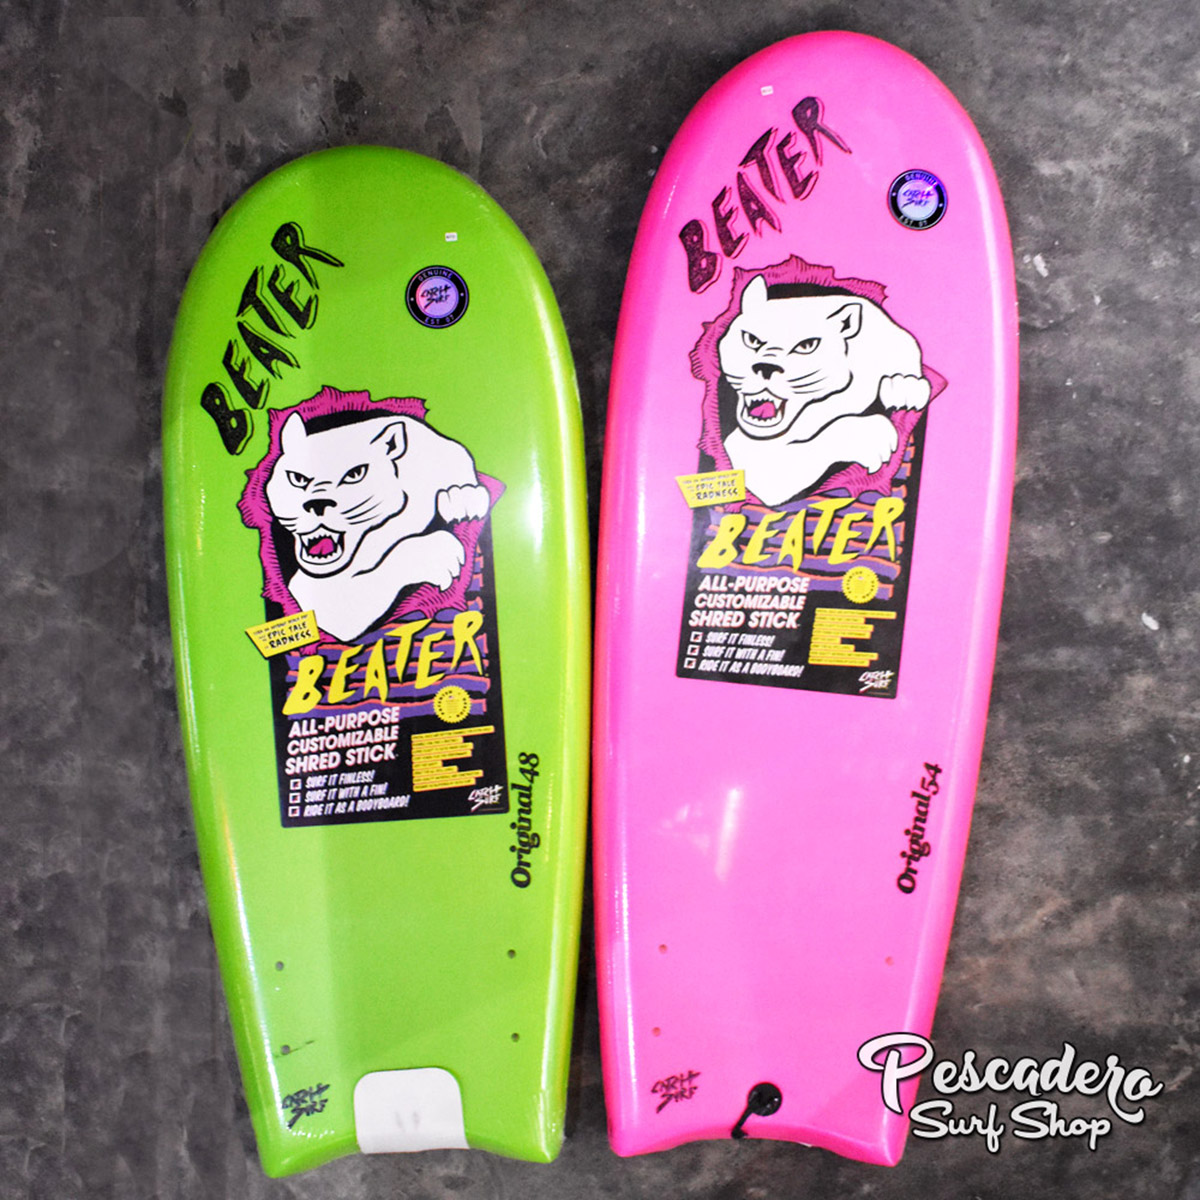 Beater Boards come in two sizes 48″ and 54″ length